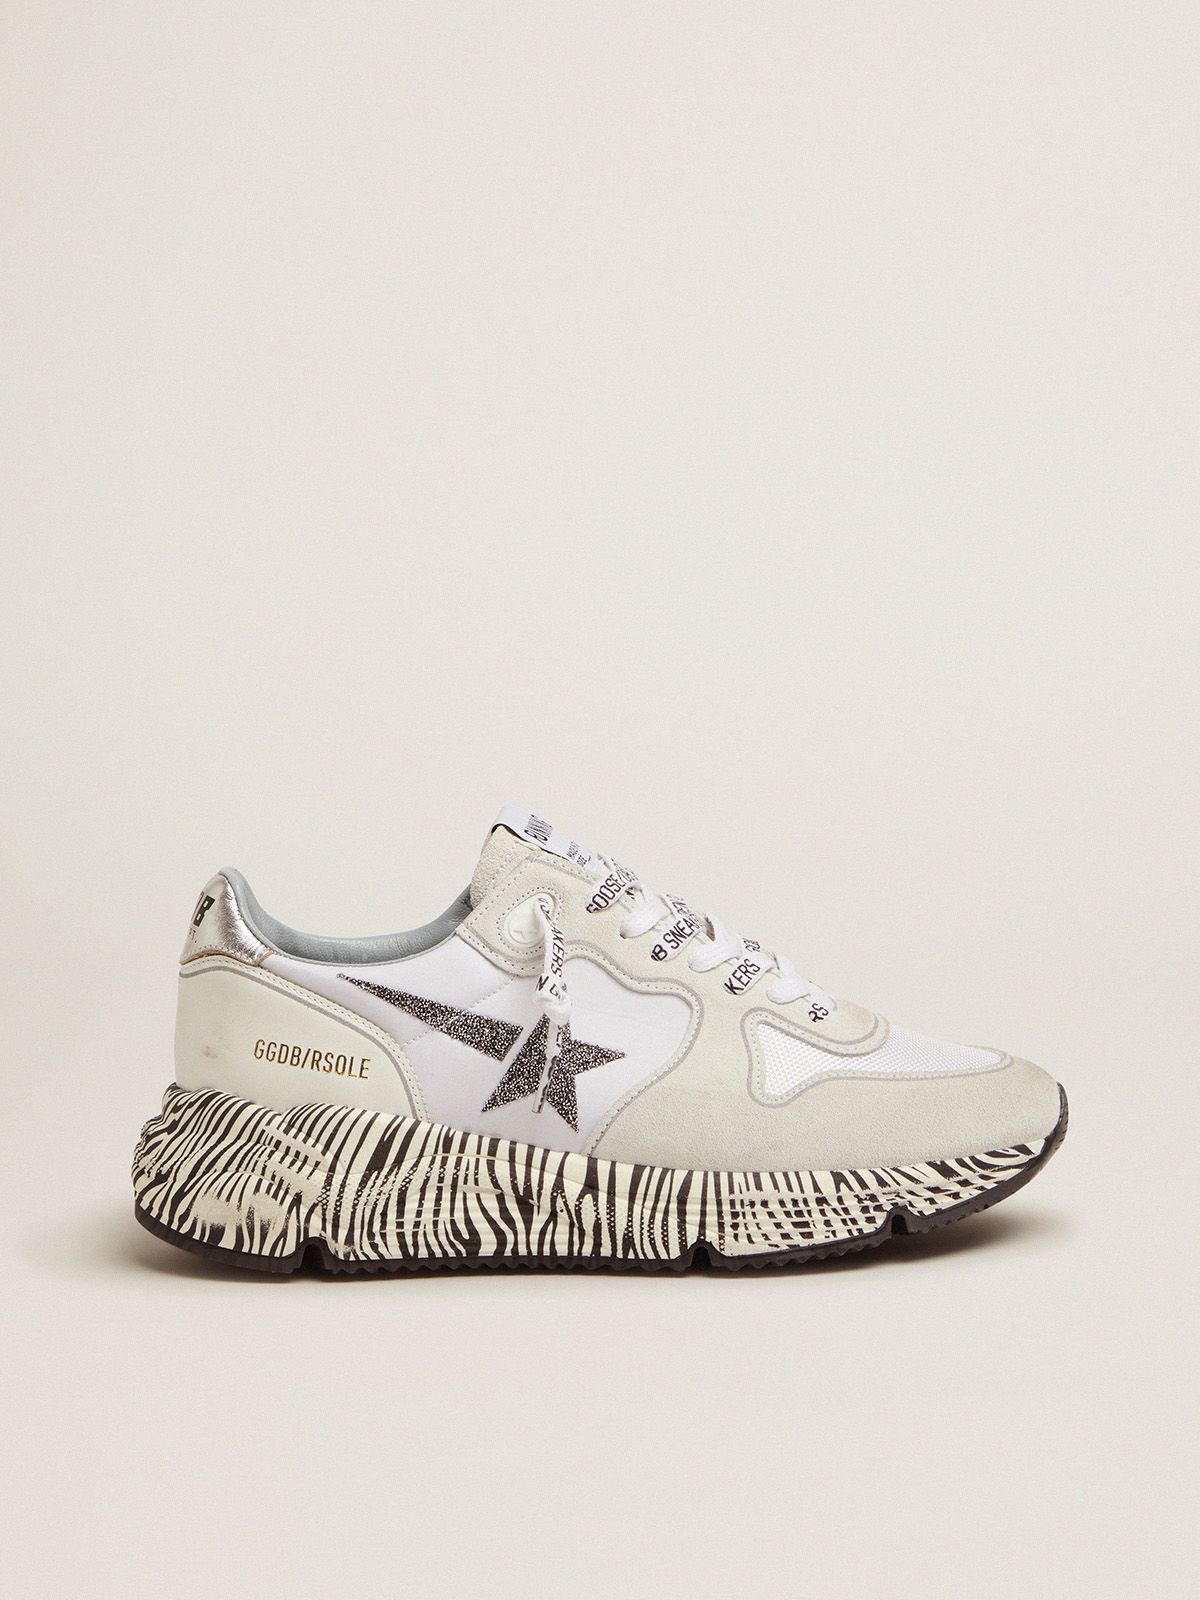 golden goose with Sole Running and crystals sole sneakers zebra-print